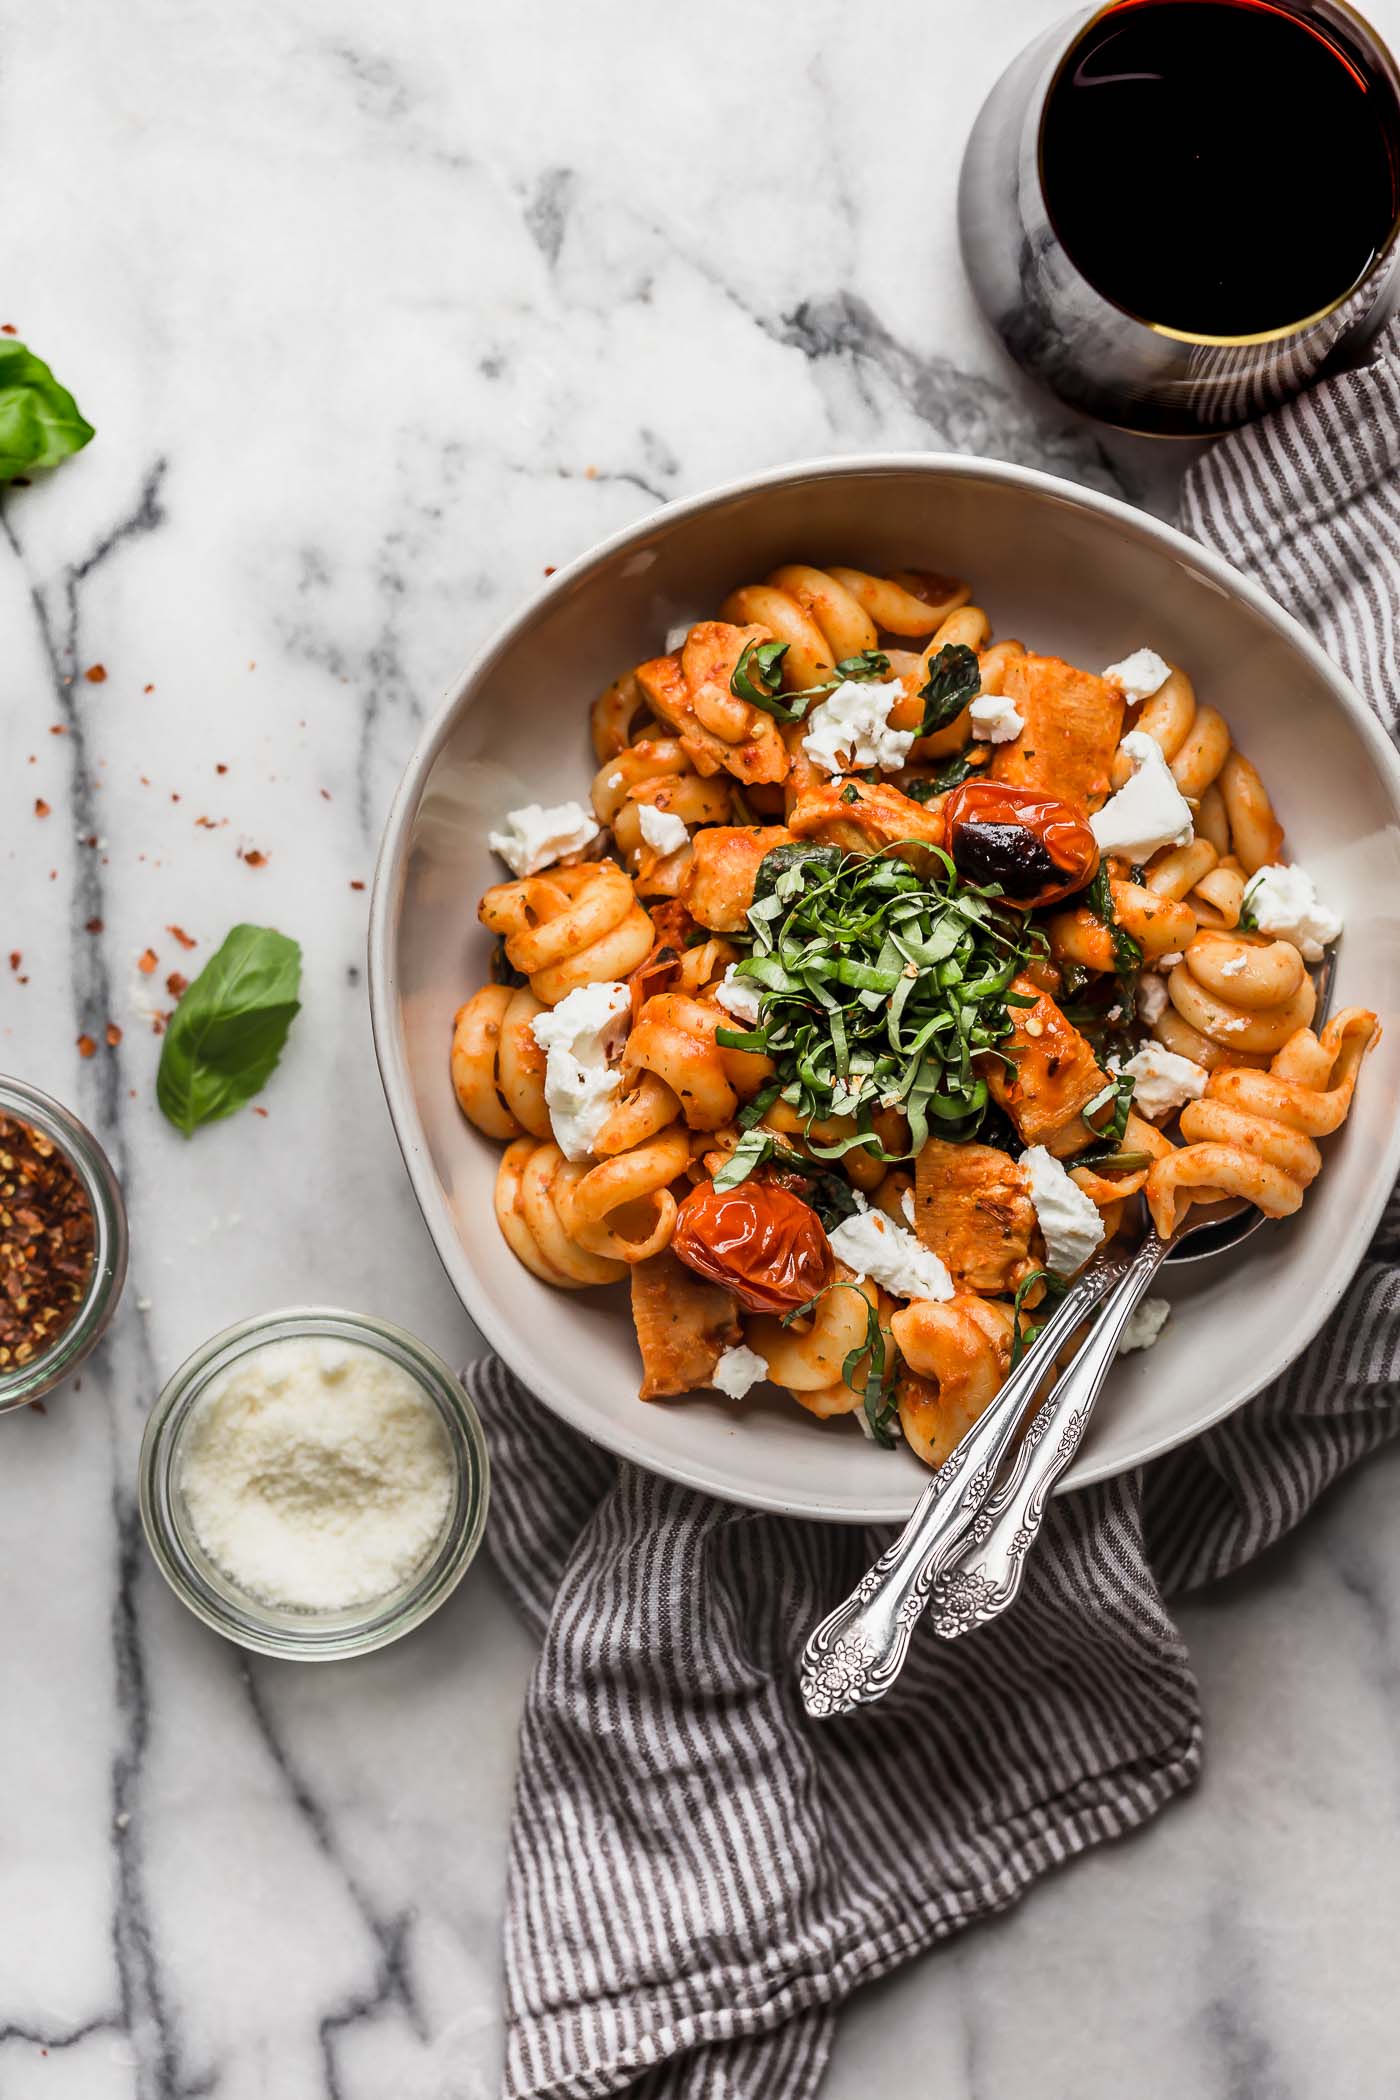 date night pasta pomodoro with chicken & goat cheese is the perfect easy pasta dinner recipe! made with chicken, spinach, goat cheese, and a homemade roasted red pepper pomodoro sauce, this pasta pomodoro with chicken & goat cheese is on your table in 25 minutes or less, tastes totally fresh, & is perfect for date night! #playswellwithbutter #easypastarecipe #pastapomodoro #pastadinner #italianrecipe